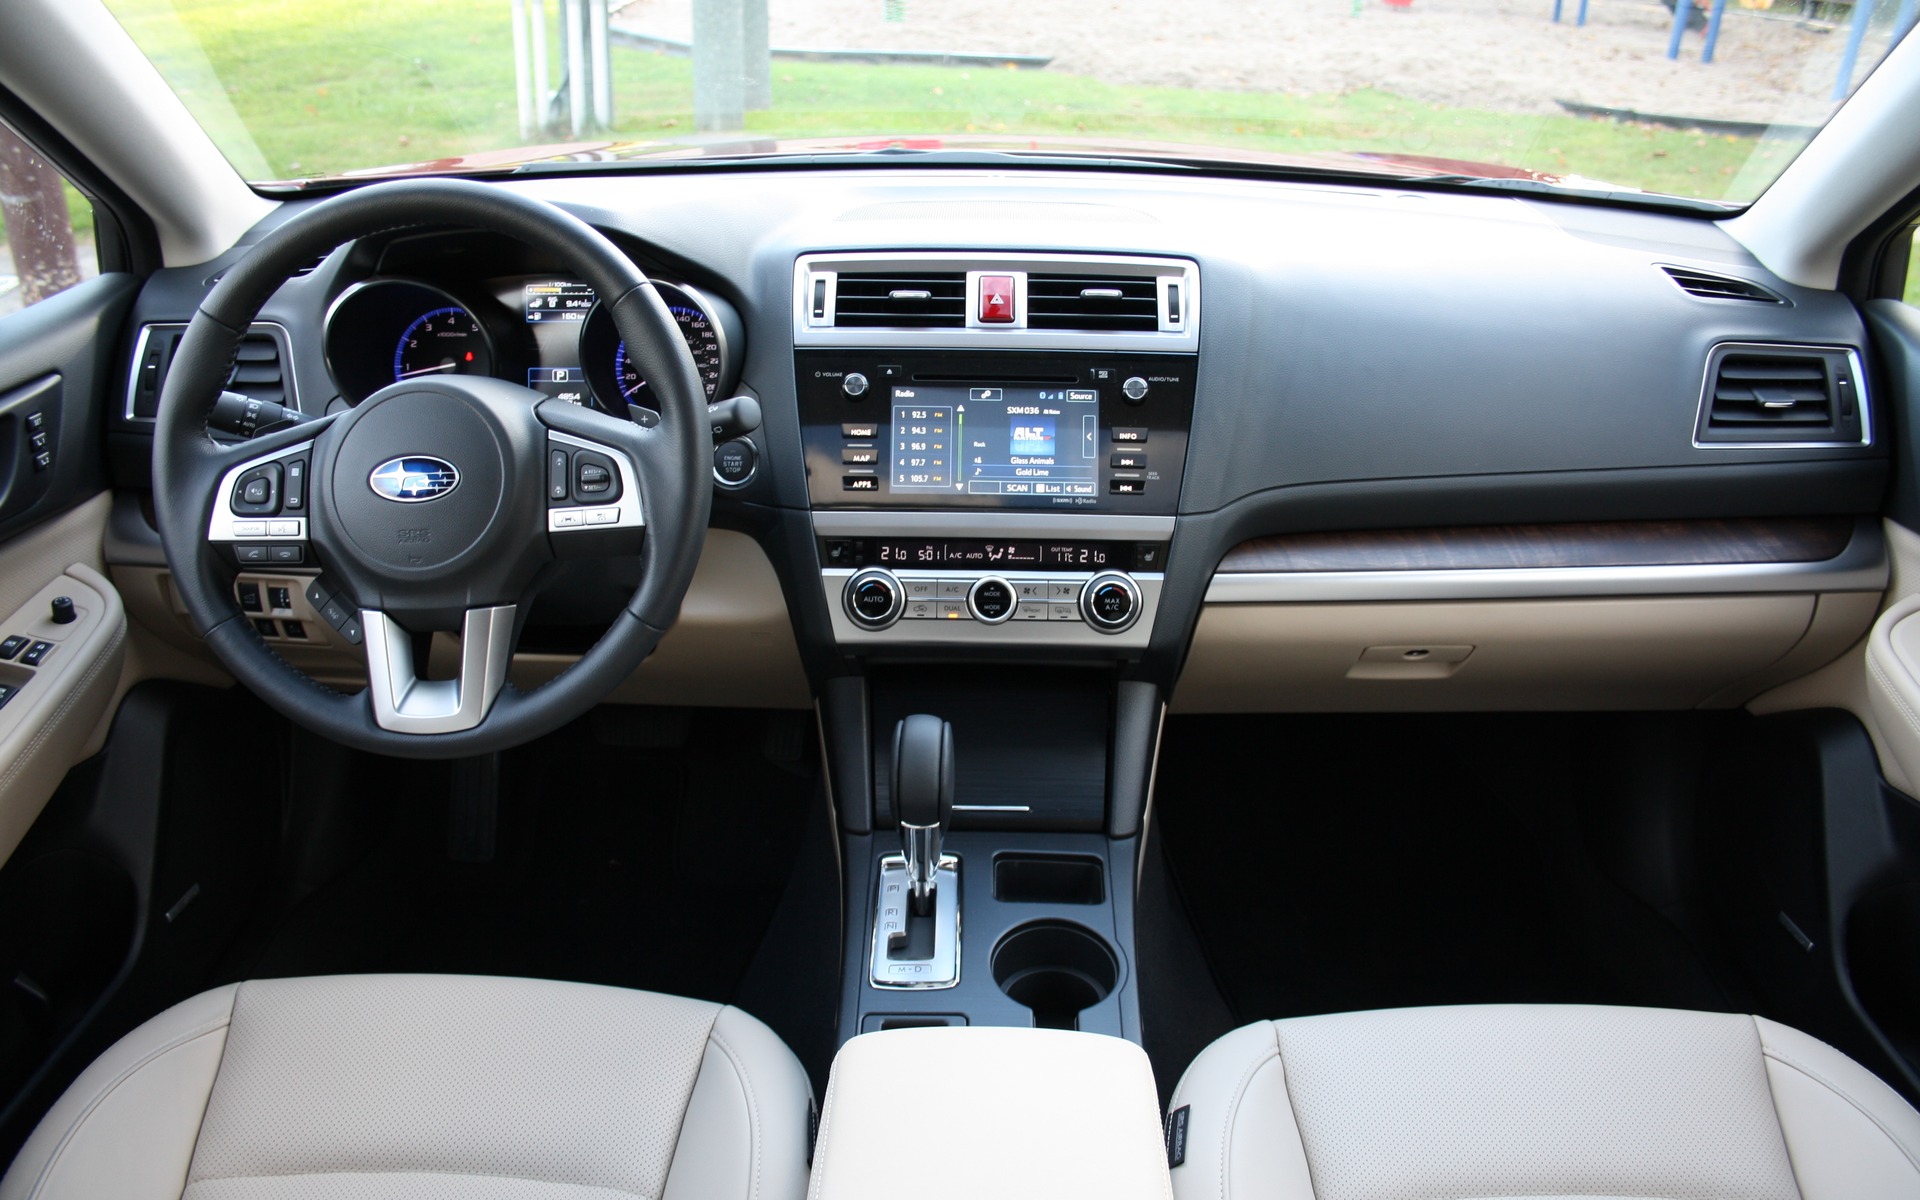 The 2016 Subaru Outback's cockpit benefits from a quality finish.